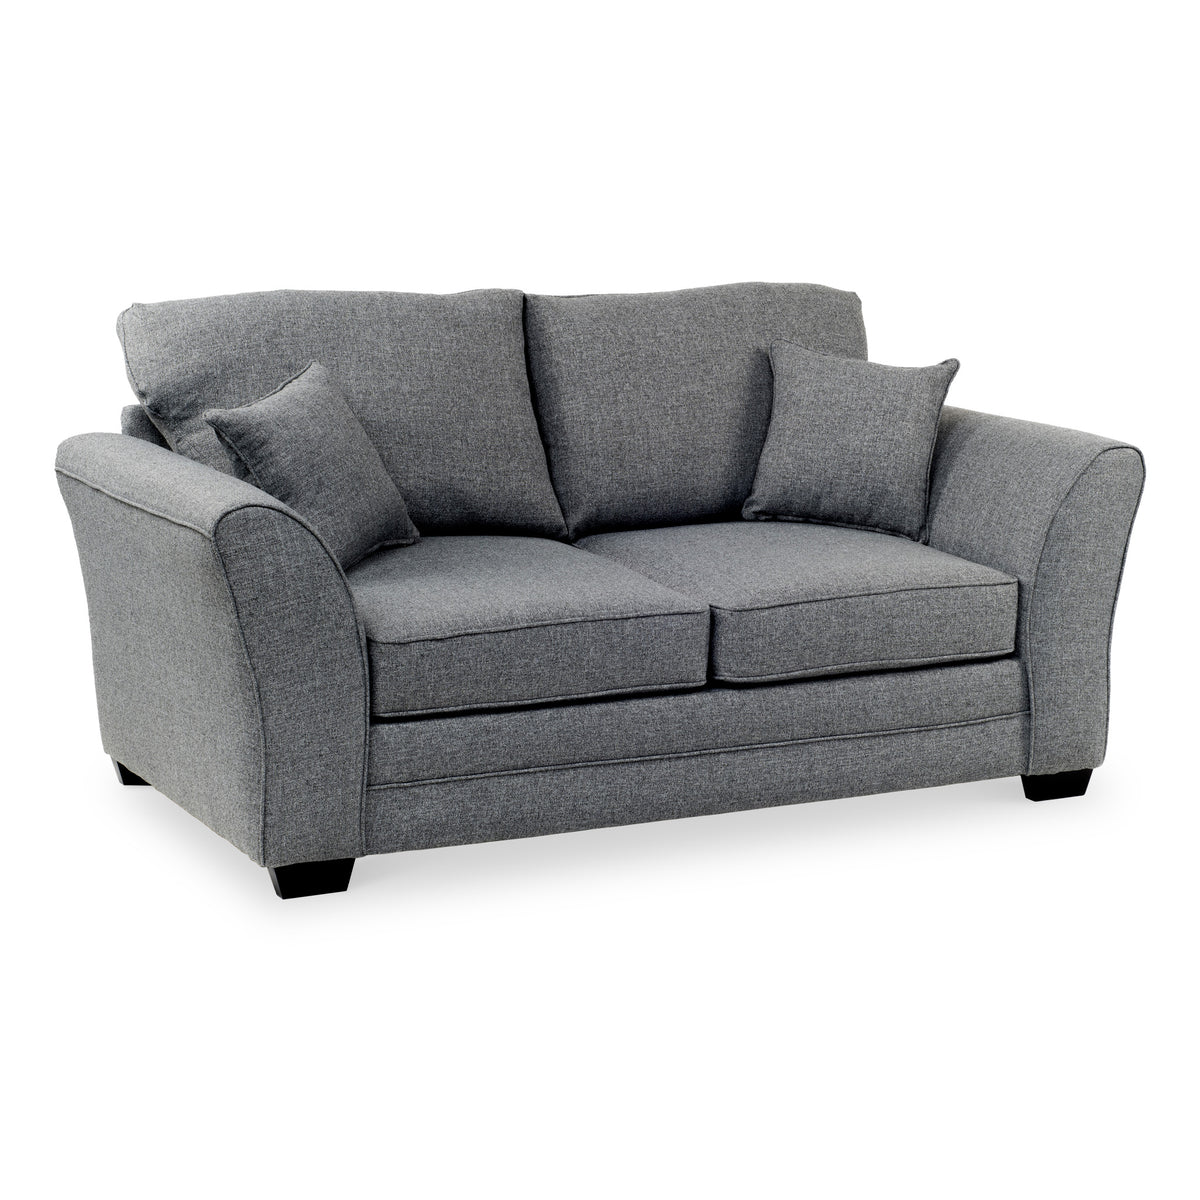 St Ives Corner Sofa Bed in Charcoal by Roseland Furniture